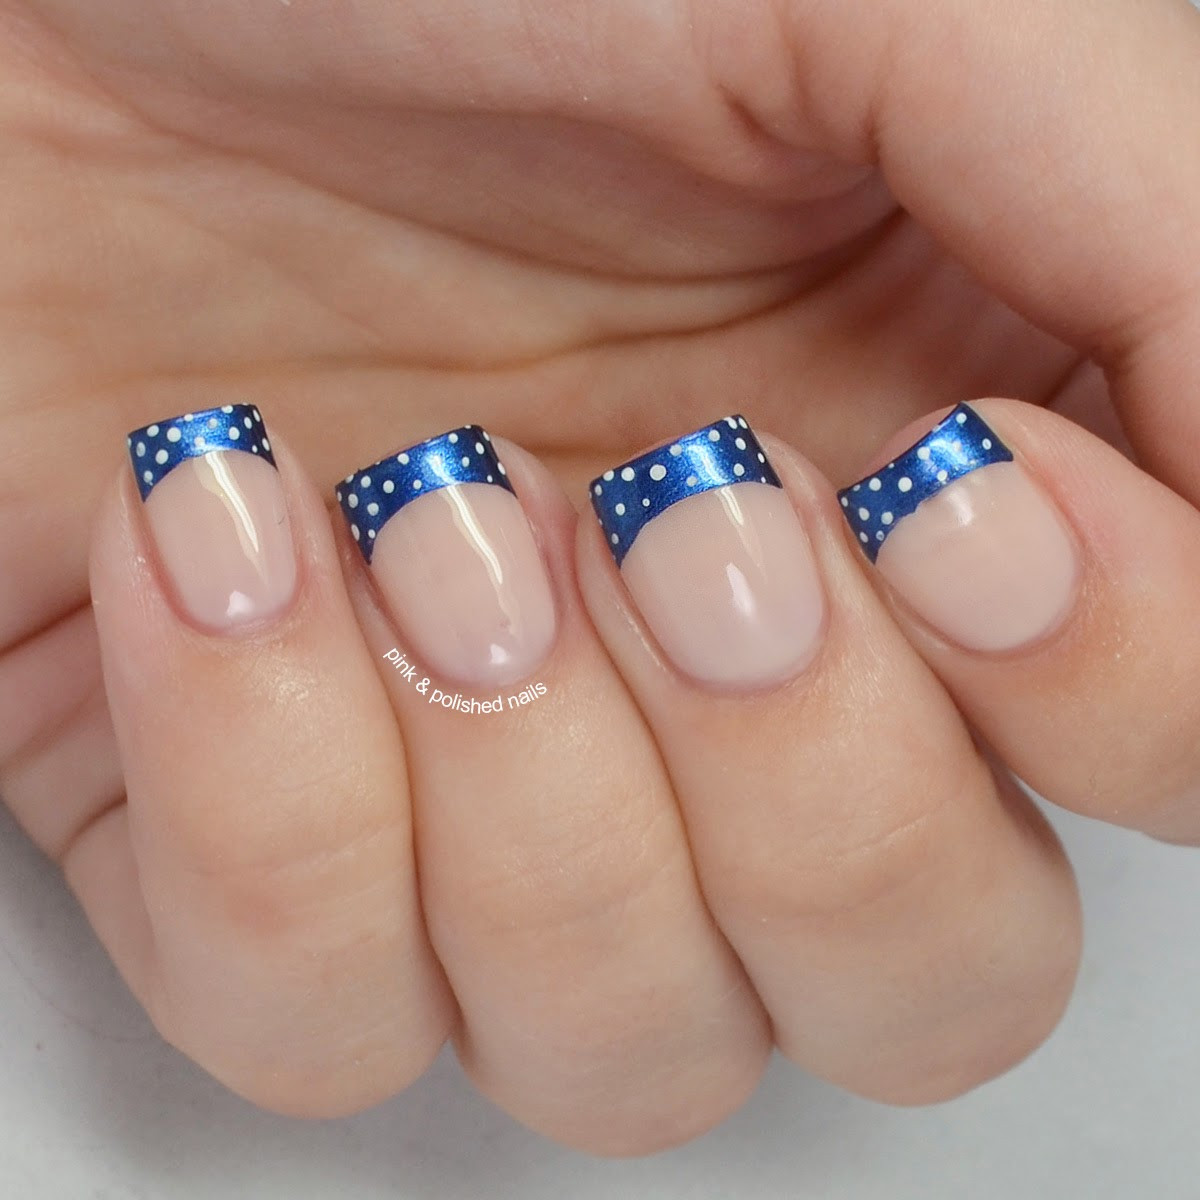 Colored French Tip Nail Designs
 Pink & Polished Navy french tips with white baby dots